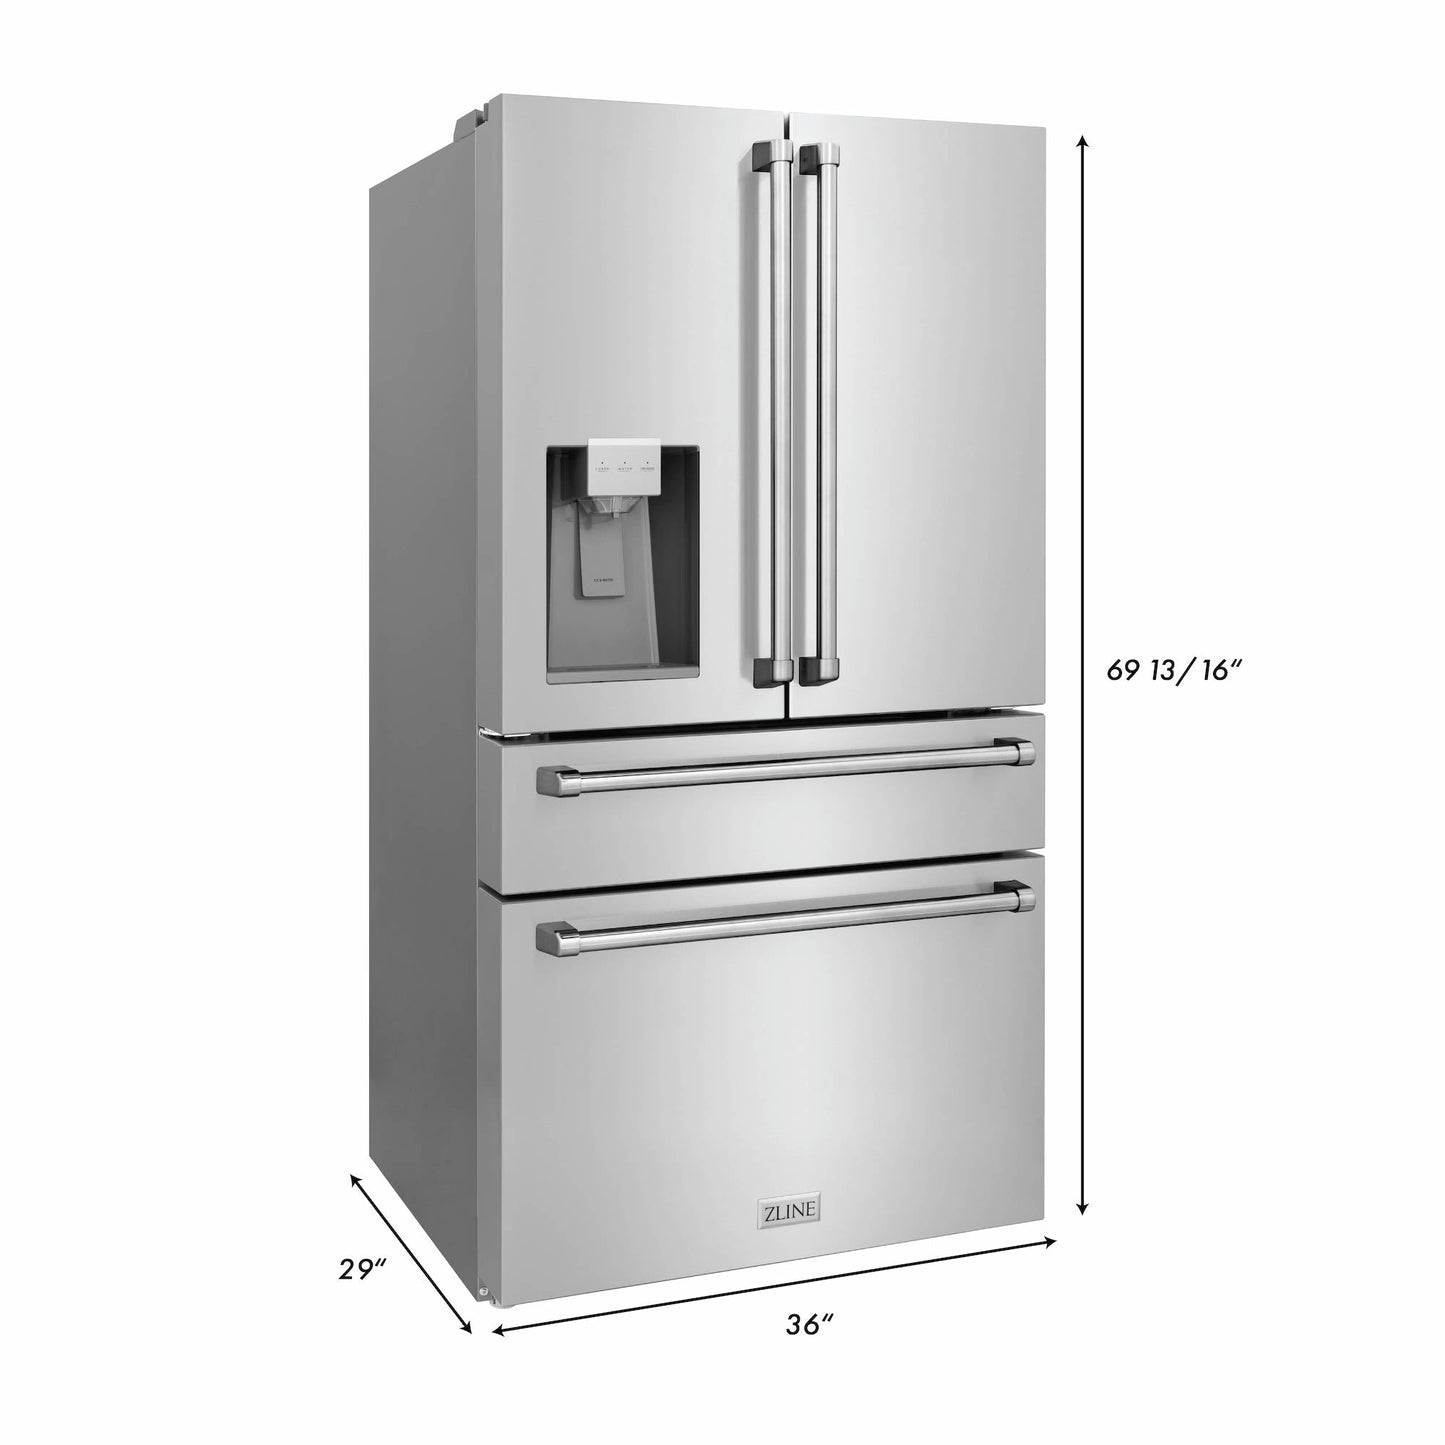 ZLINE 36" 21.6 cu. ft. French Door Refrigerator with Water and Ice Dispenser and Water Filter in Stainless Steel, RFM-W-WF-36